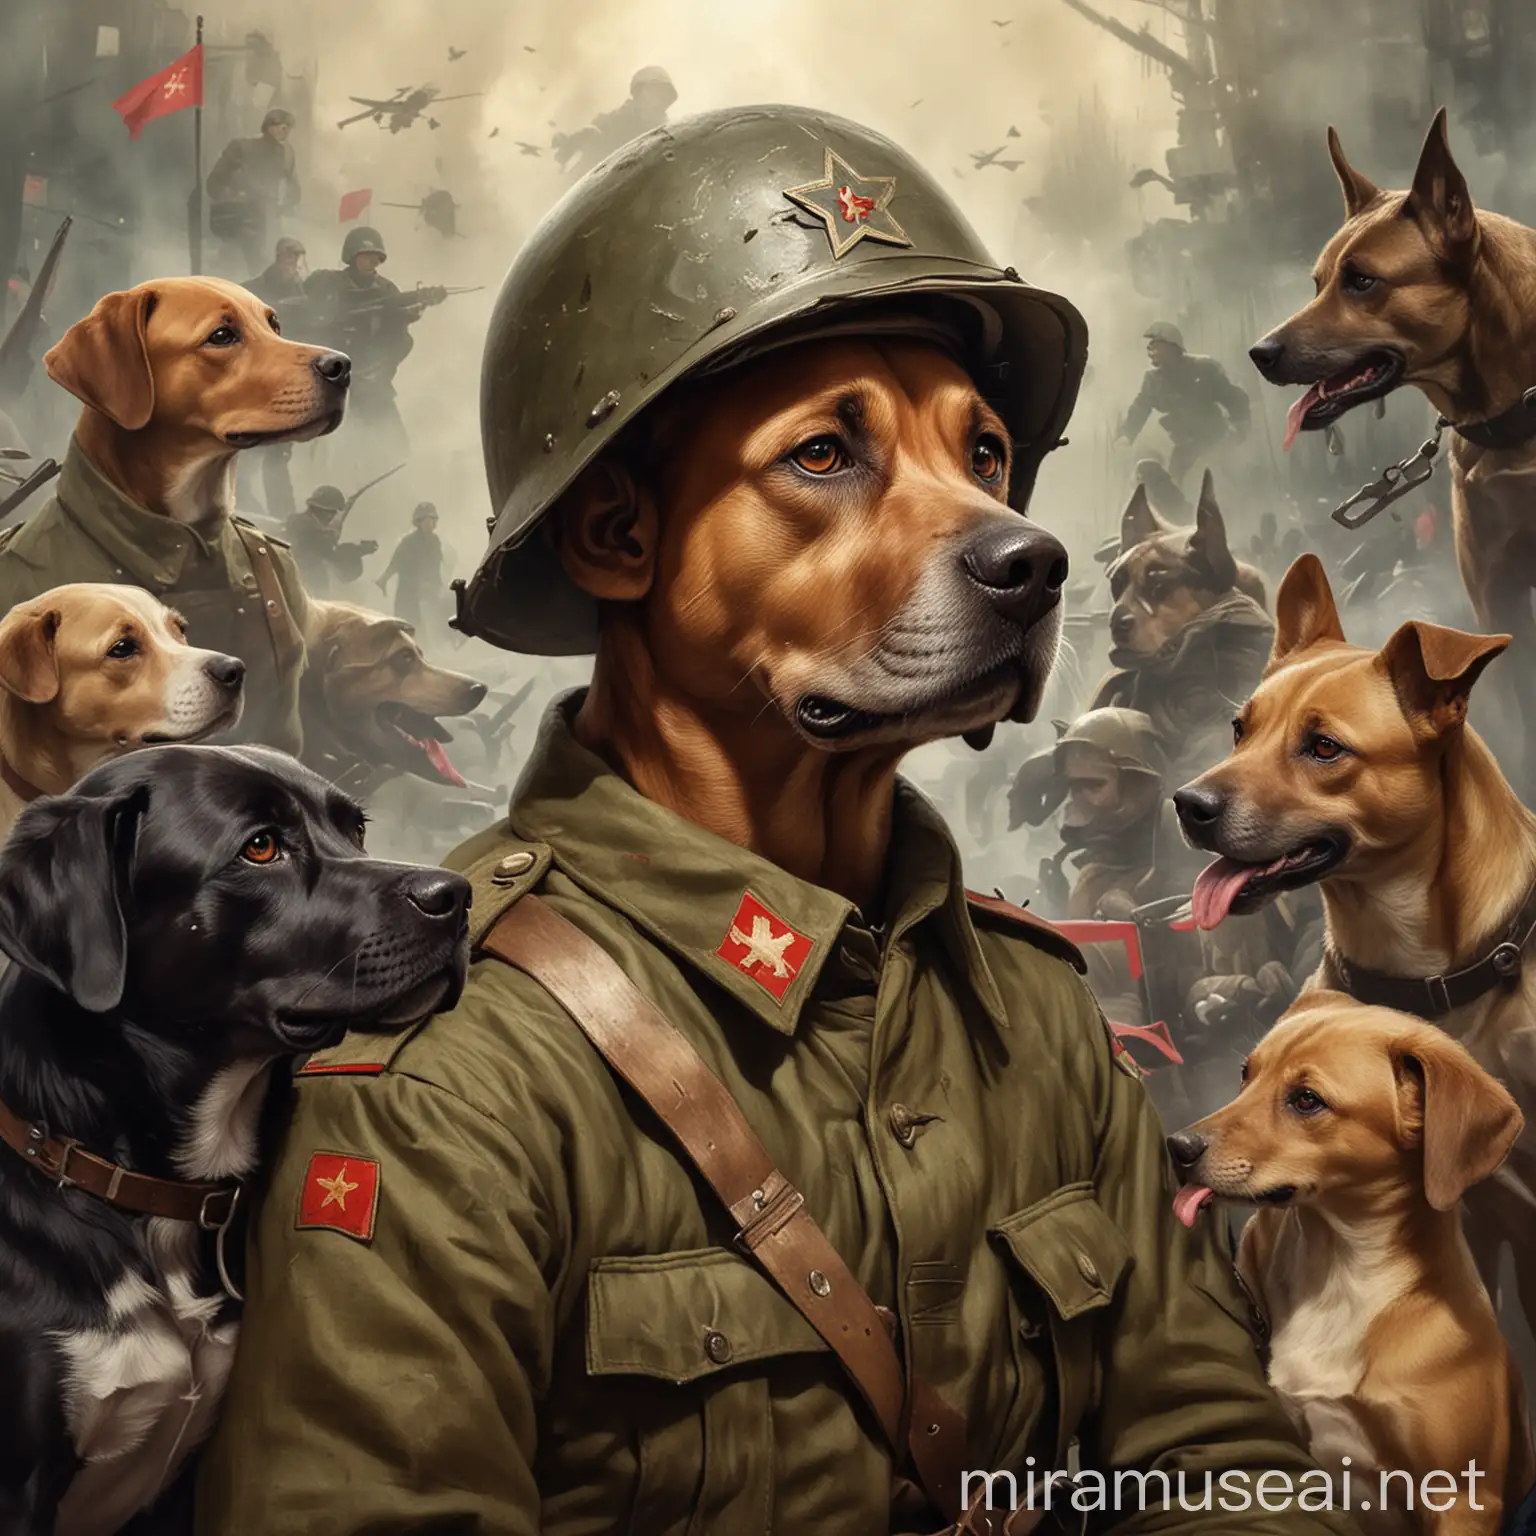 Make a picture about dogs-saboteurs and dogs-heroes of the Great Patriotic War.